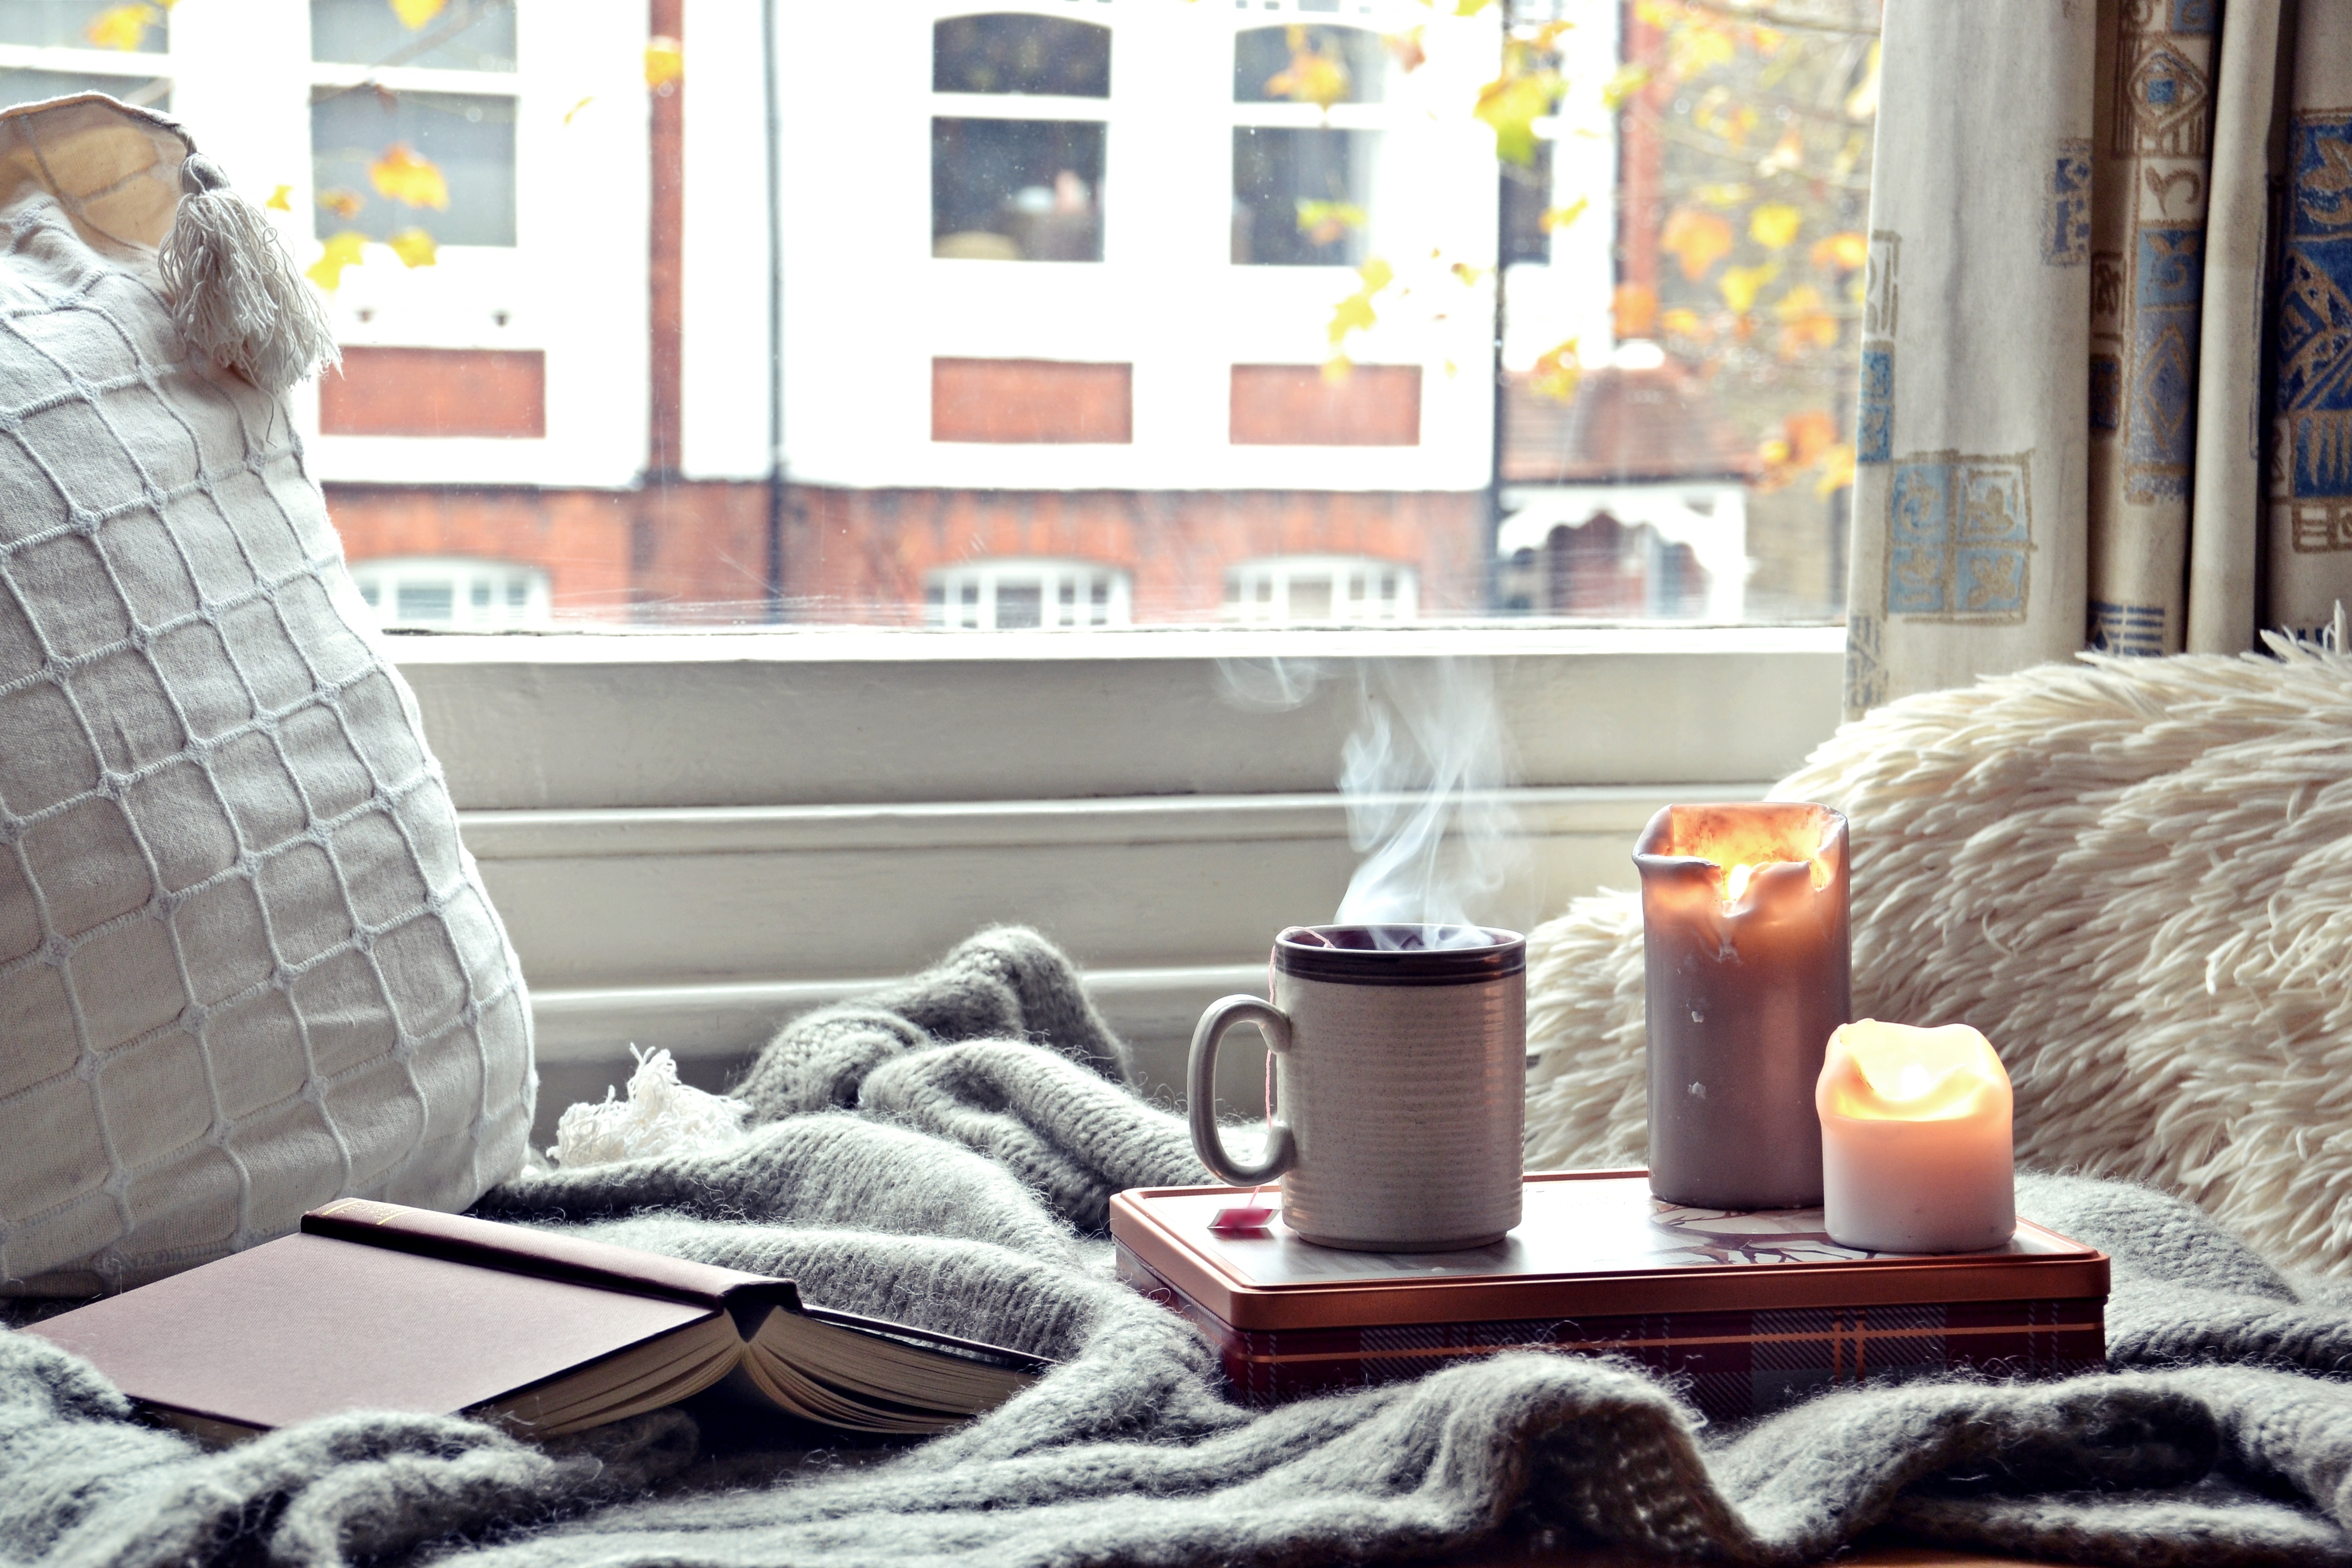 Cozy pillows and blankets sit adjacent to a window that looks out onto an urban street. A book is overturned on the blanket and a tray holds two lit candles and a steaming mug of liquid.